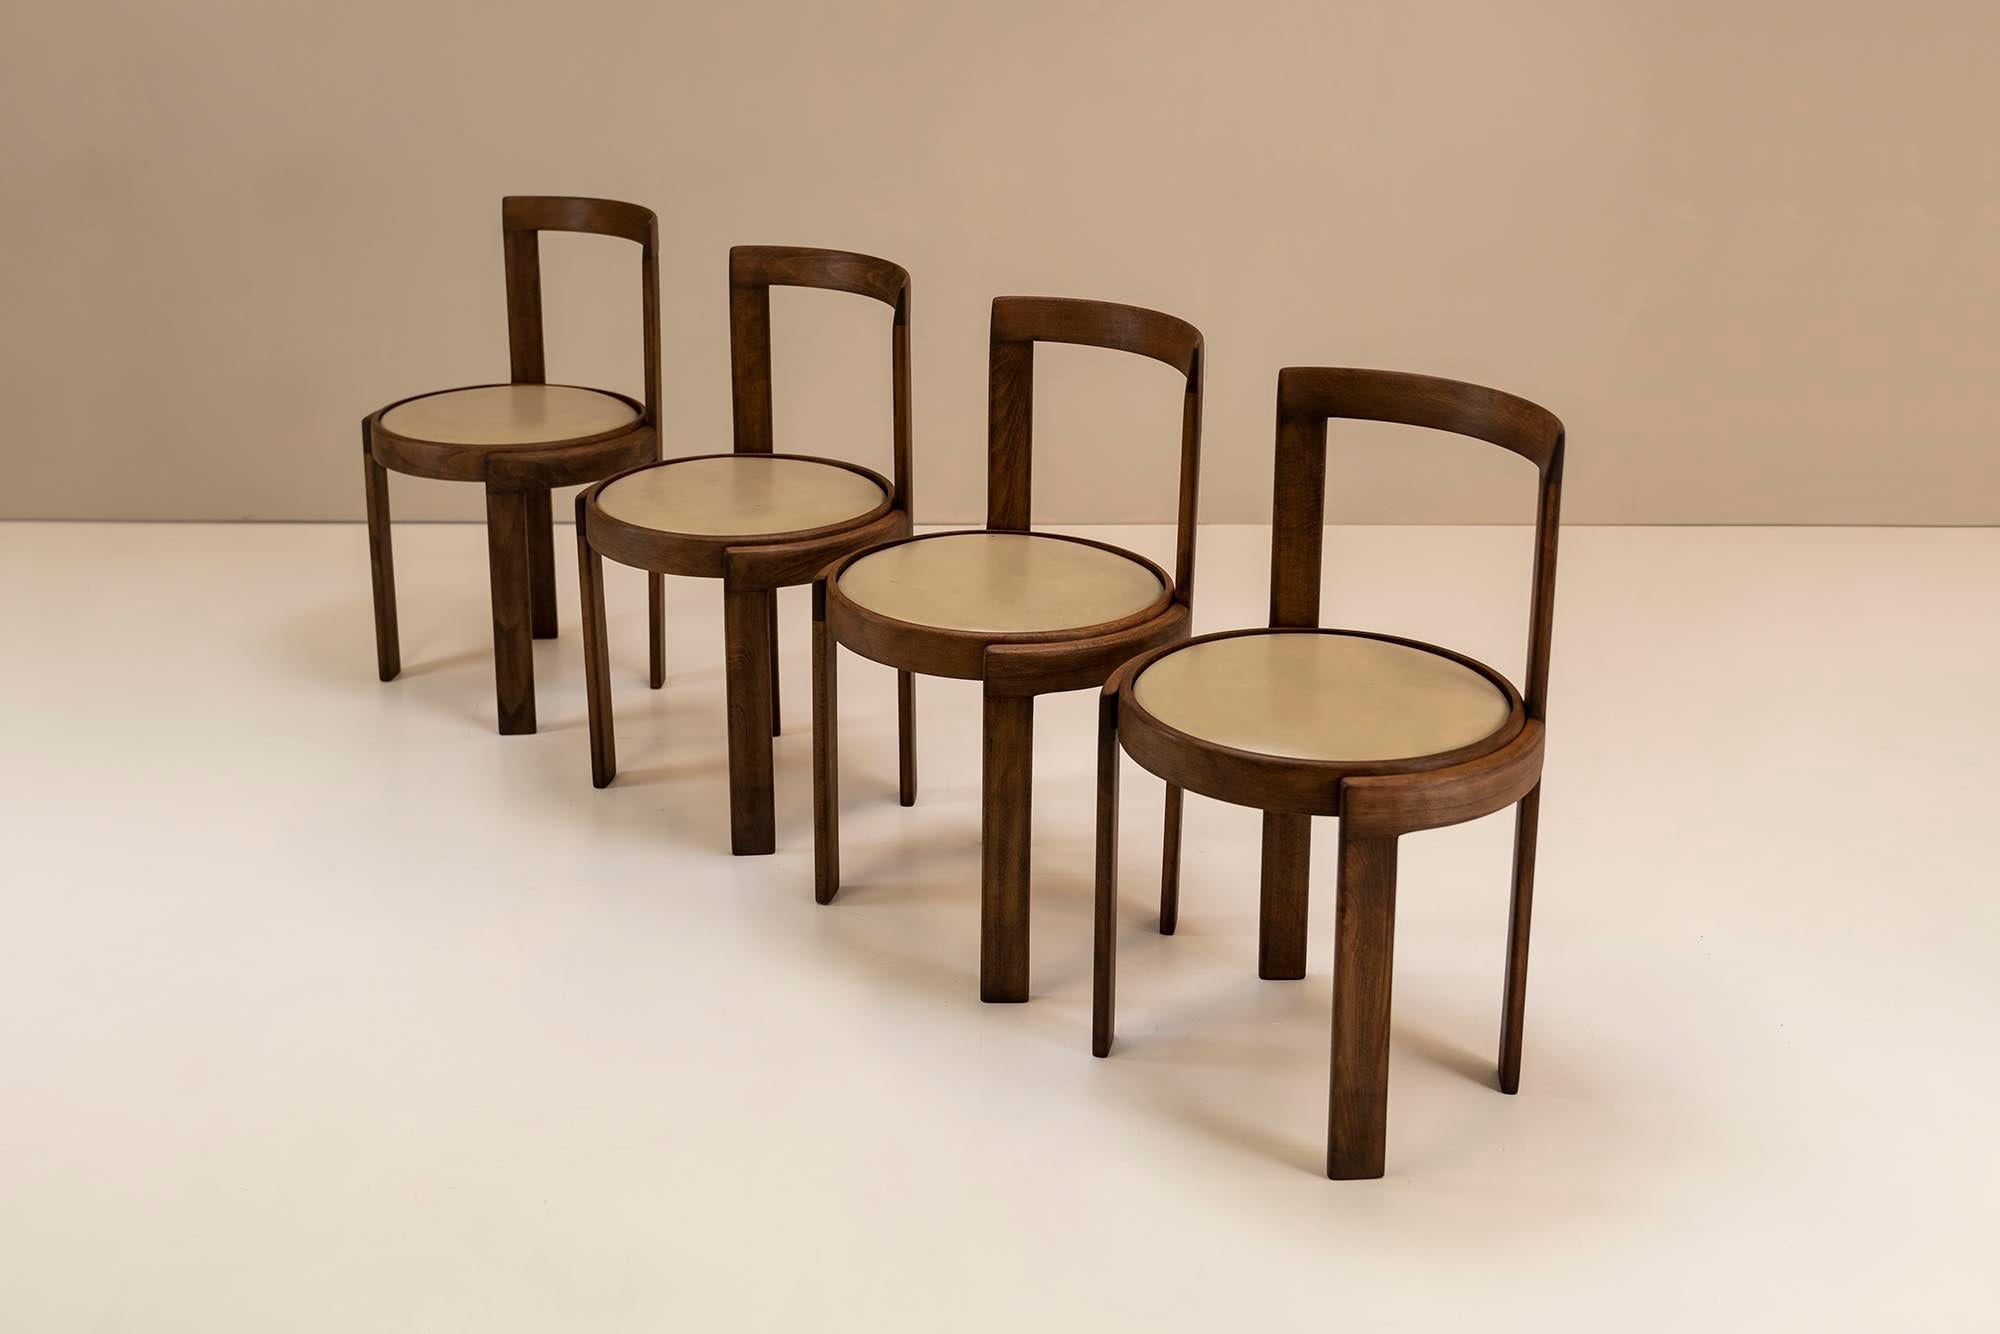 Mid-Century Modern Italian Modernist Dining Chairs in Ash Wood and Faux Leather, 1960s For Sale